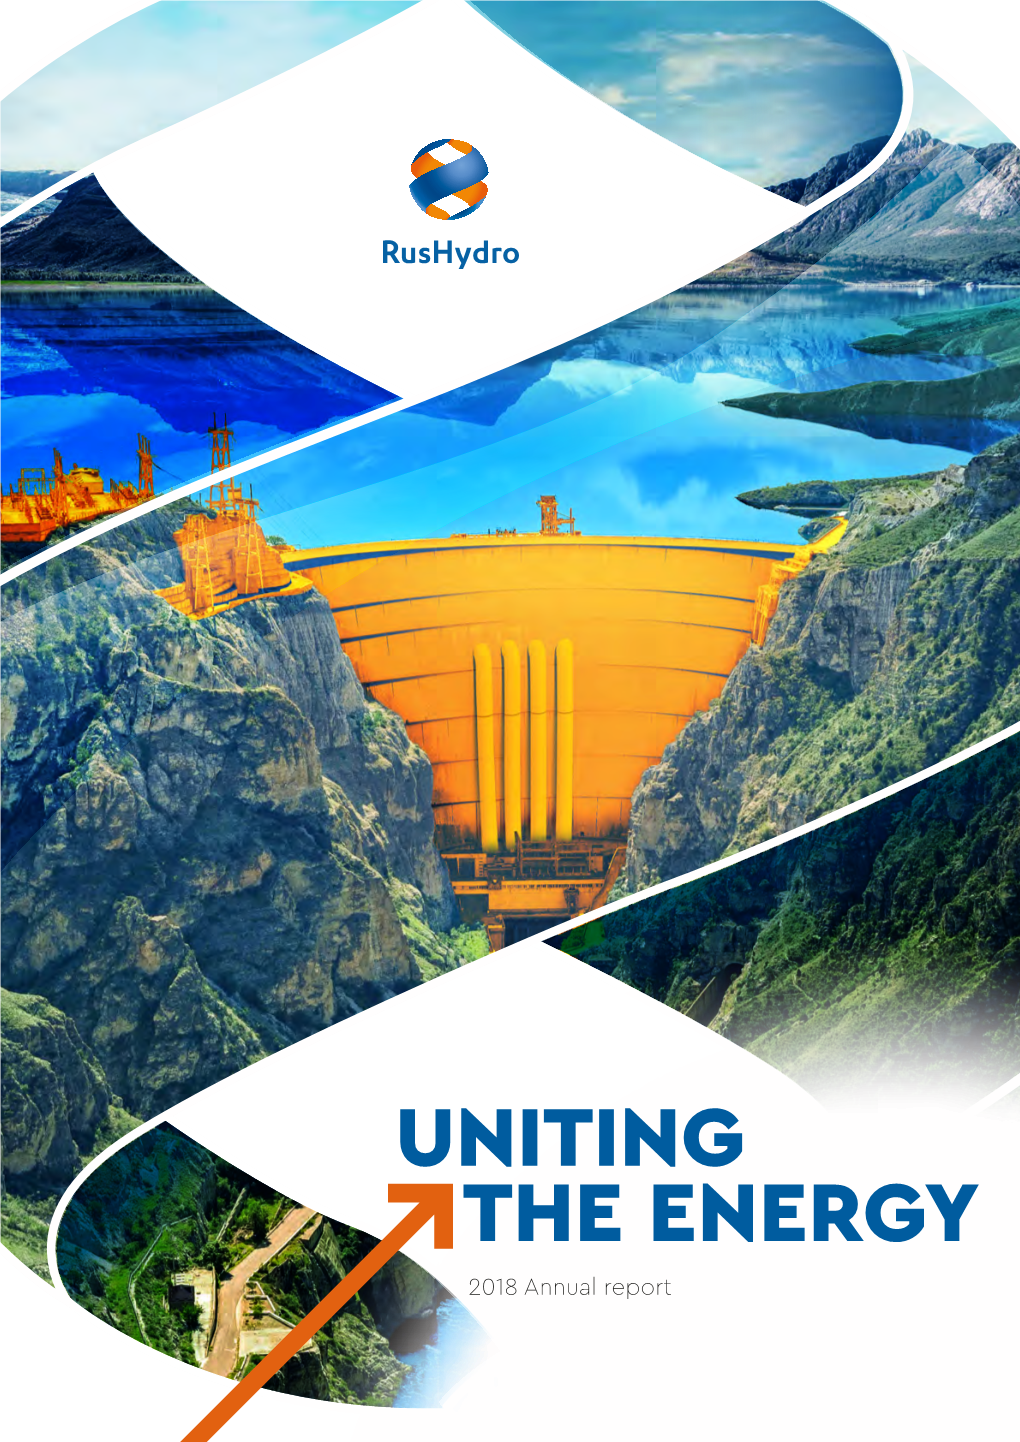 UNITING the ENERGY 2018 Annual Report ANNUAL REPORT 2018 of PSJC FEDERAL HYDROGENERATING COMPANY – RUSHYDRO, INCLUDING INFORMATION on SUSTAINABLE DEVELOPMENT